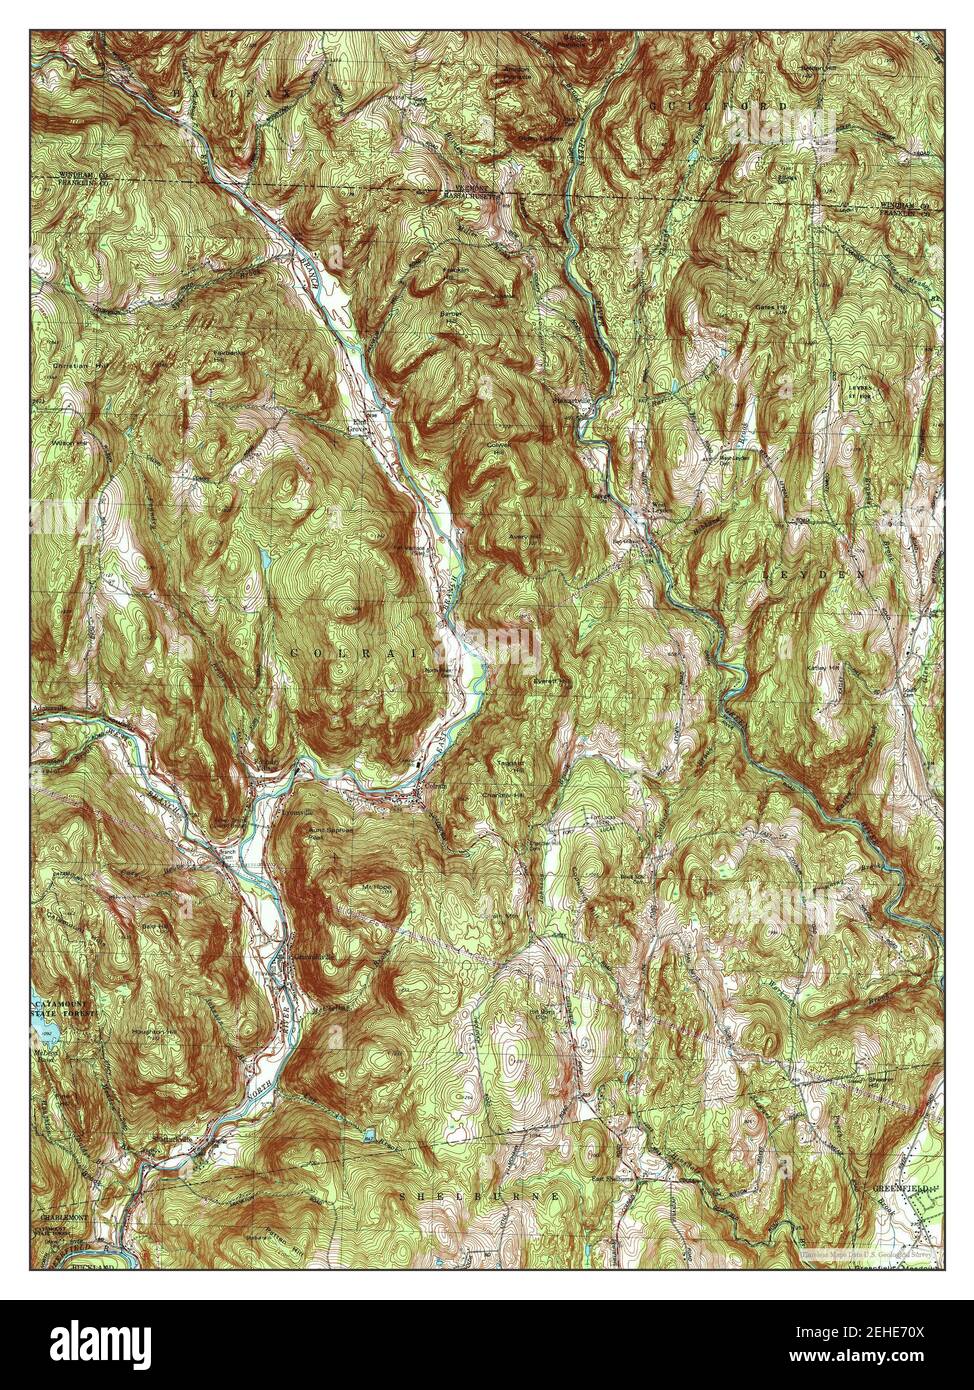 Colrain, Massachusetts, map 1977, 1:25000, United States of America by Timeless Maps, data U.S. Geological Survey Stock Photo